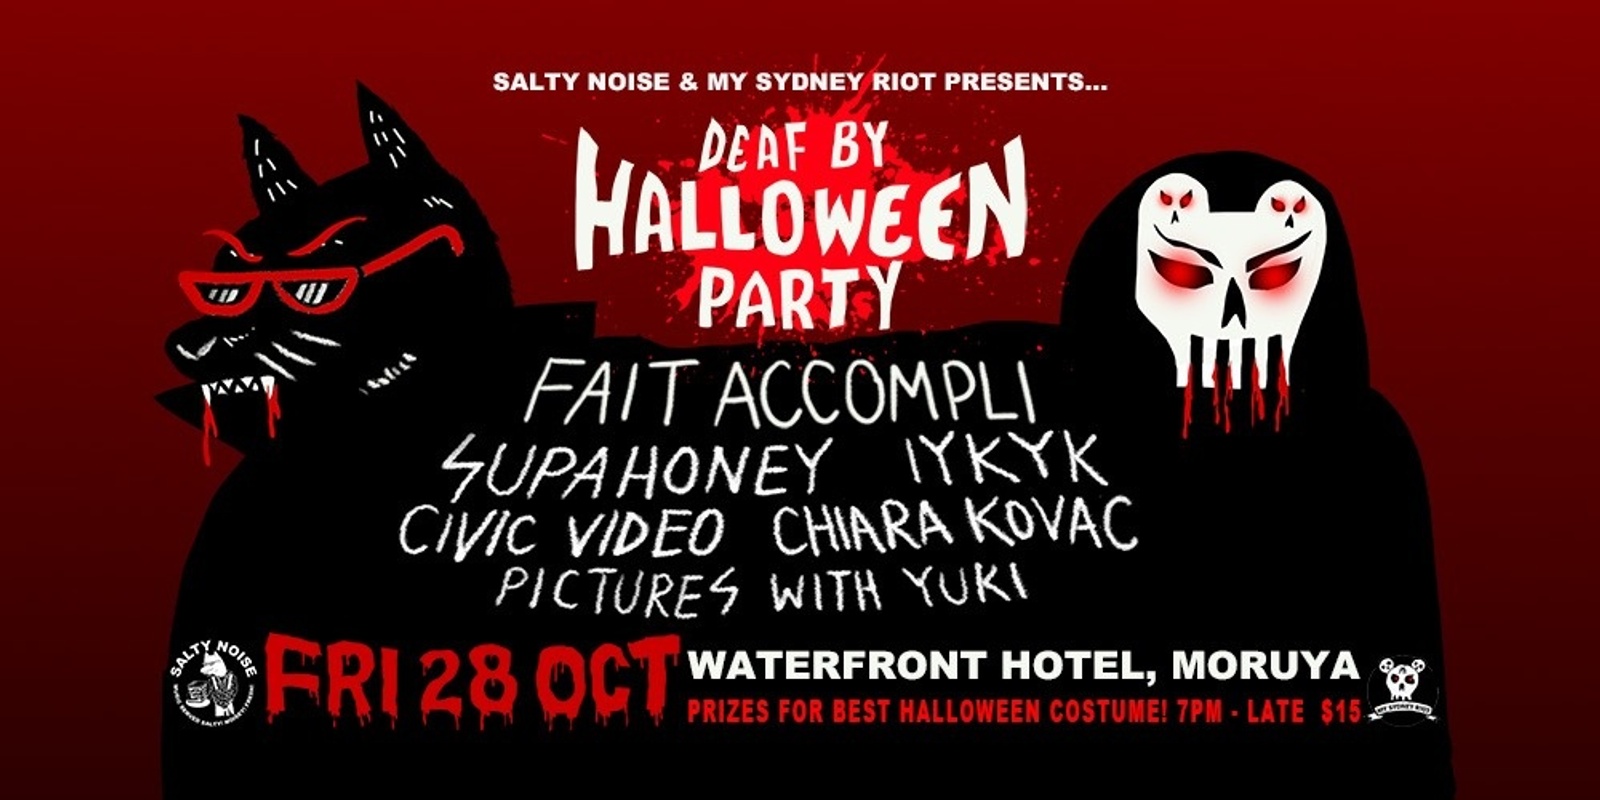 Banner image for DEAF BY HALLOWEEN PARTY // FAIT ACCOMPLI, SUPAHONEY, CIVIC VIDEO, CHIARA KOVAC, PICTURES WITH YUKI + MORE